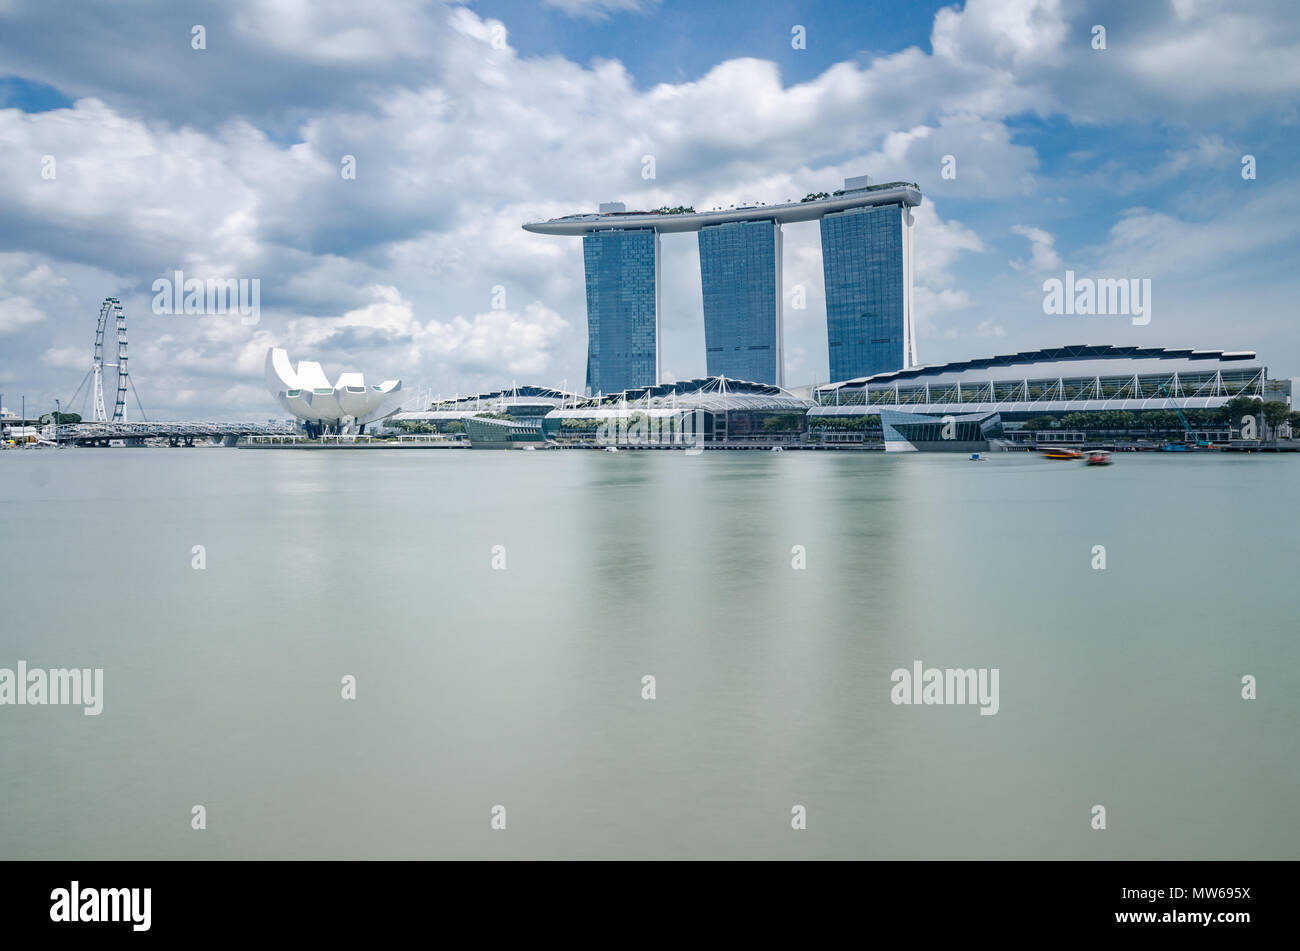 A beautiful day at Marina Bay with Marina Bay Sands Hotel at the background, one of the most spectacular Hotel in Singapore. Stock Photo